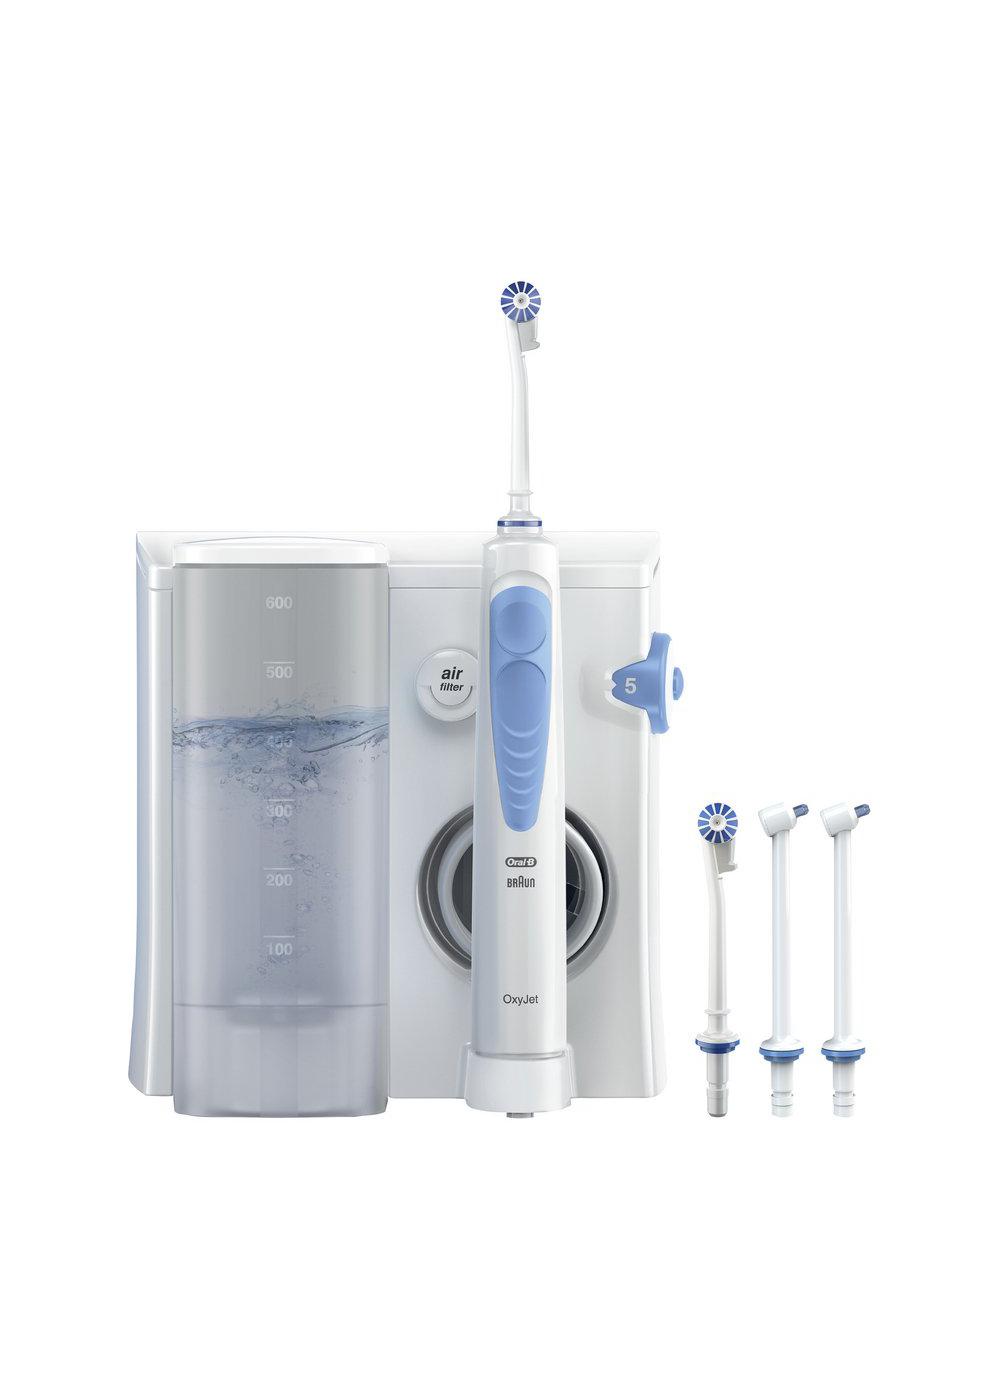 Oral-B Water Flosser + 4 Nozzles - White; image 4 of 8